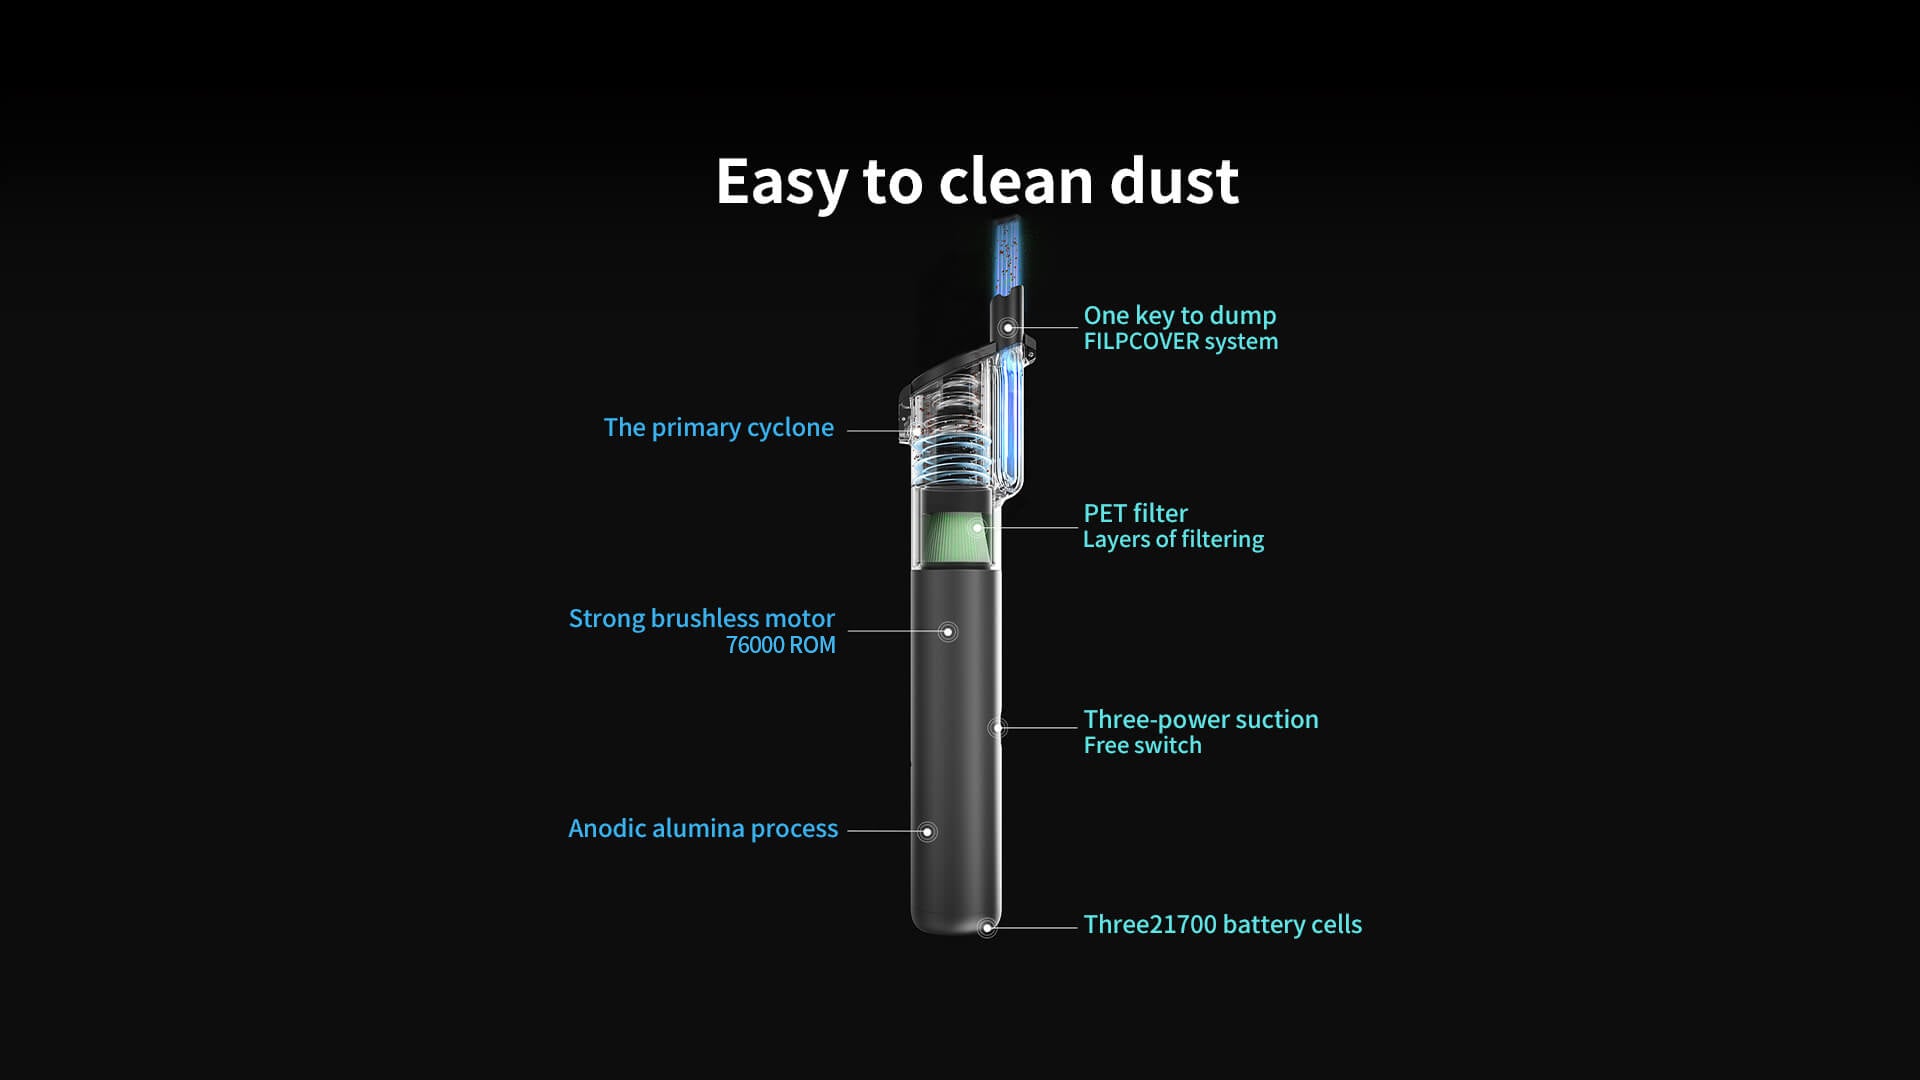 Easy to clean dust. One key to dump FILPCOVER system. The primary cyclone. PET filter Layers of filtering. Strong brushless motor 76000ROM. Three-power suction Free switch Anodic alumina process Three 21700 battery cells